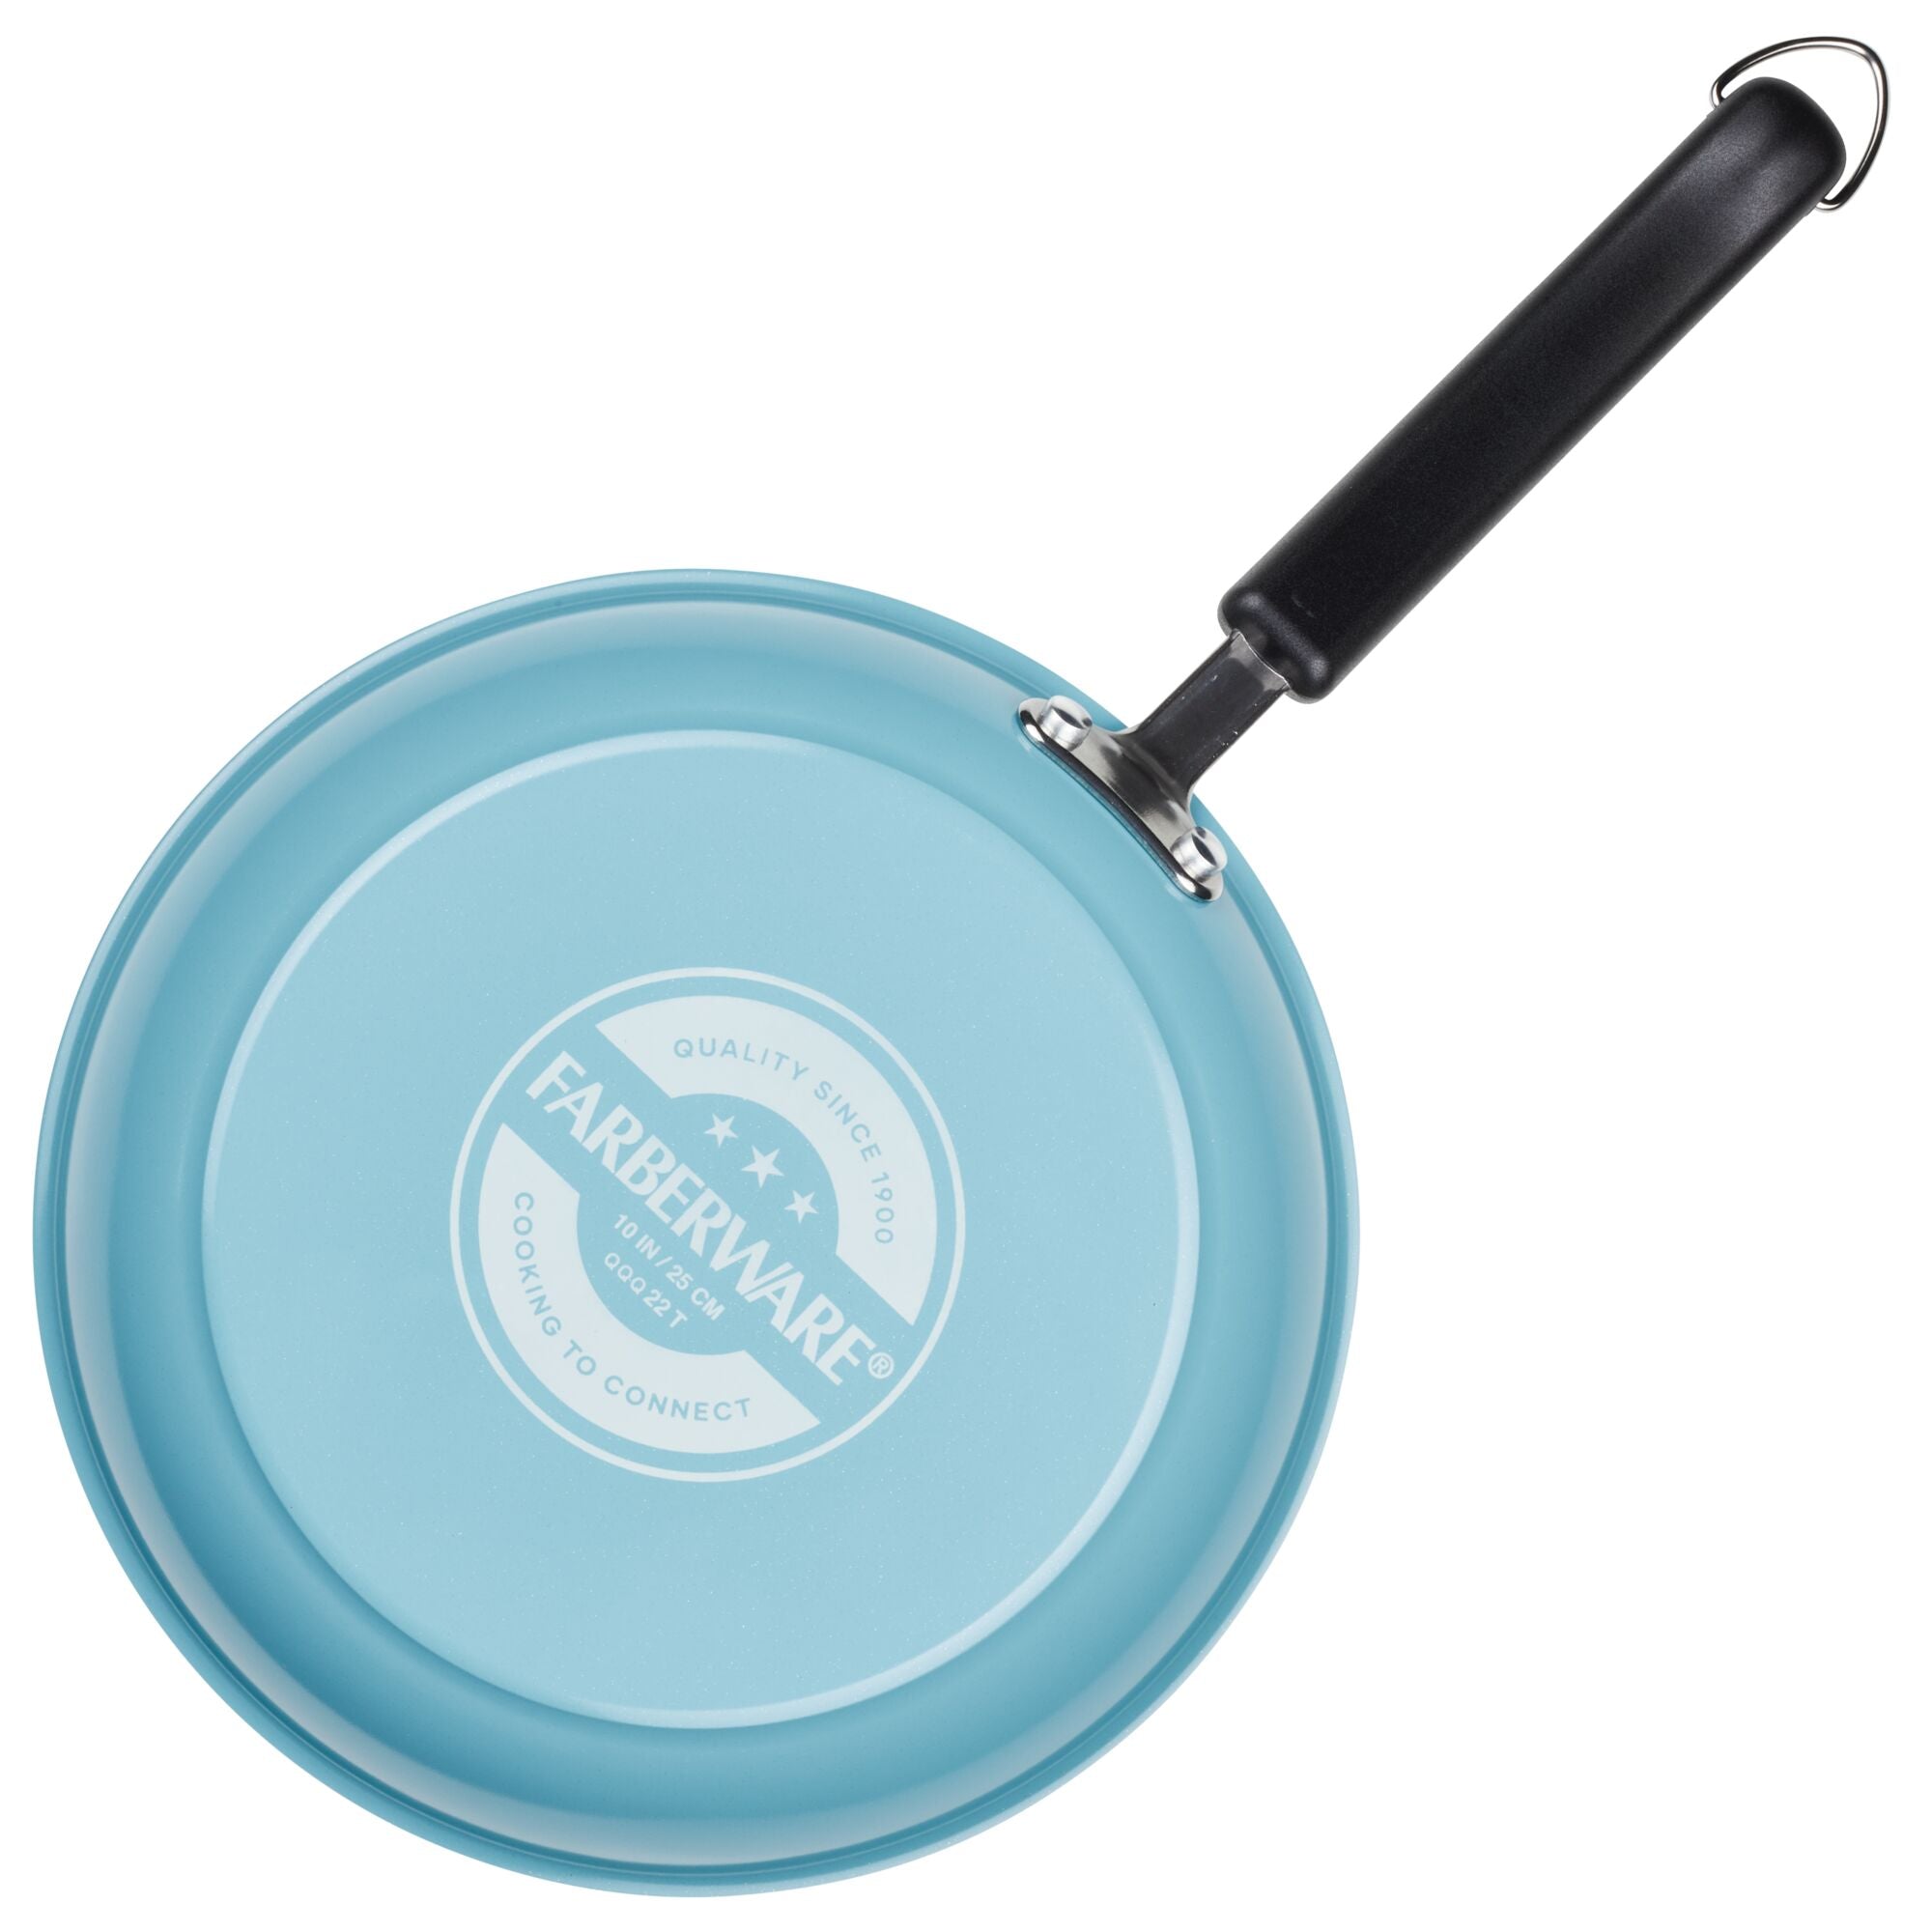 Is Farberware a Good Cookware Brand? (The Ultimate Review)